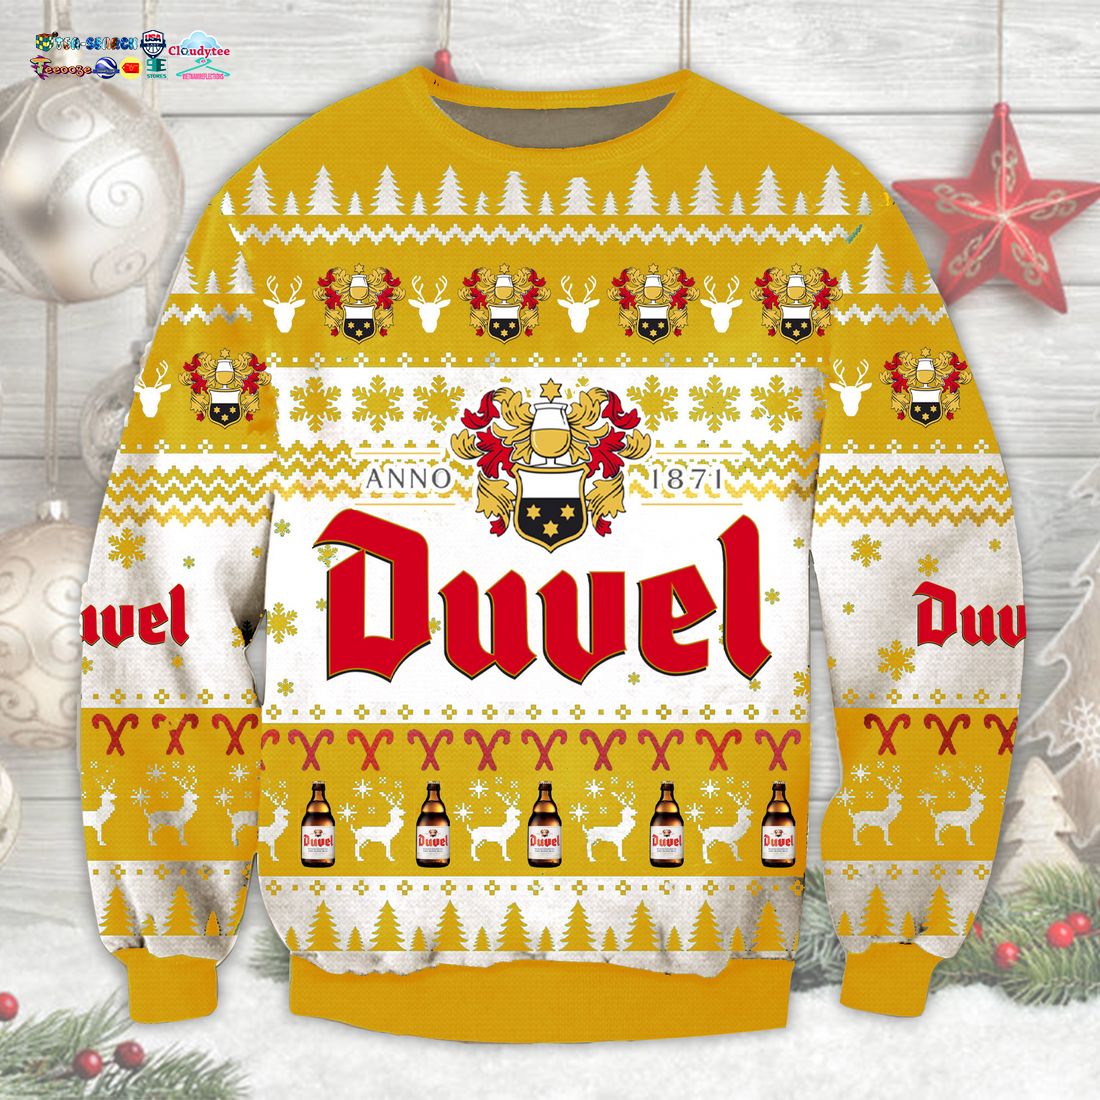 Duvel Ugly Christmas Sweater - You look fresh in nature